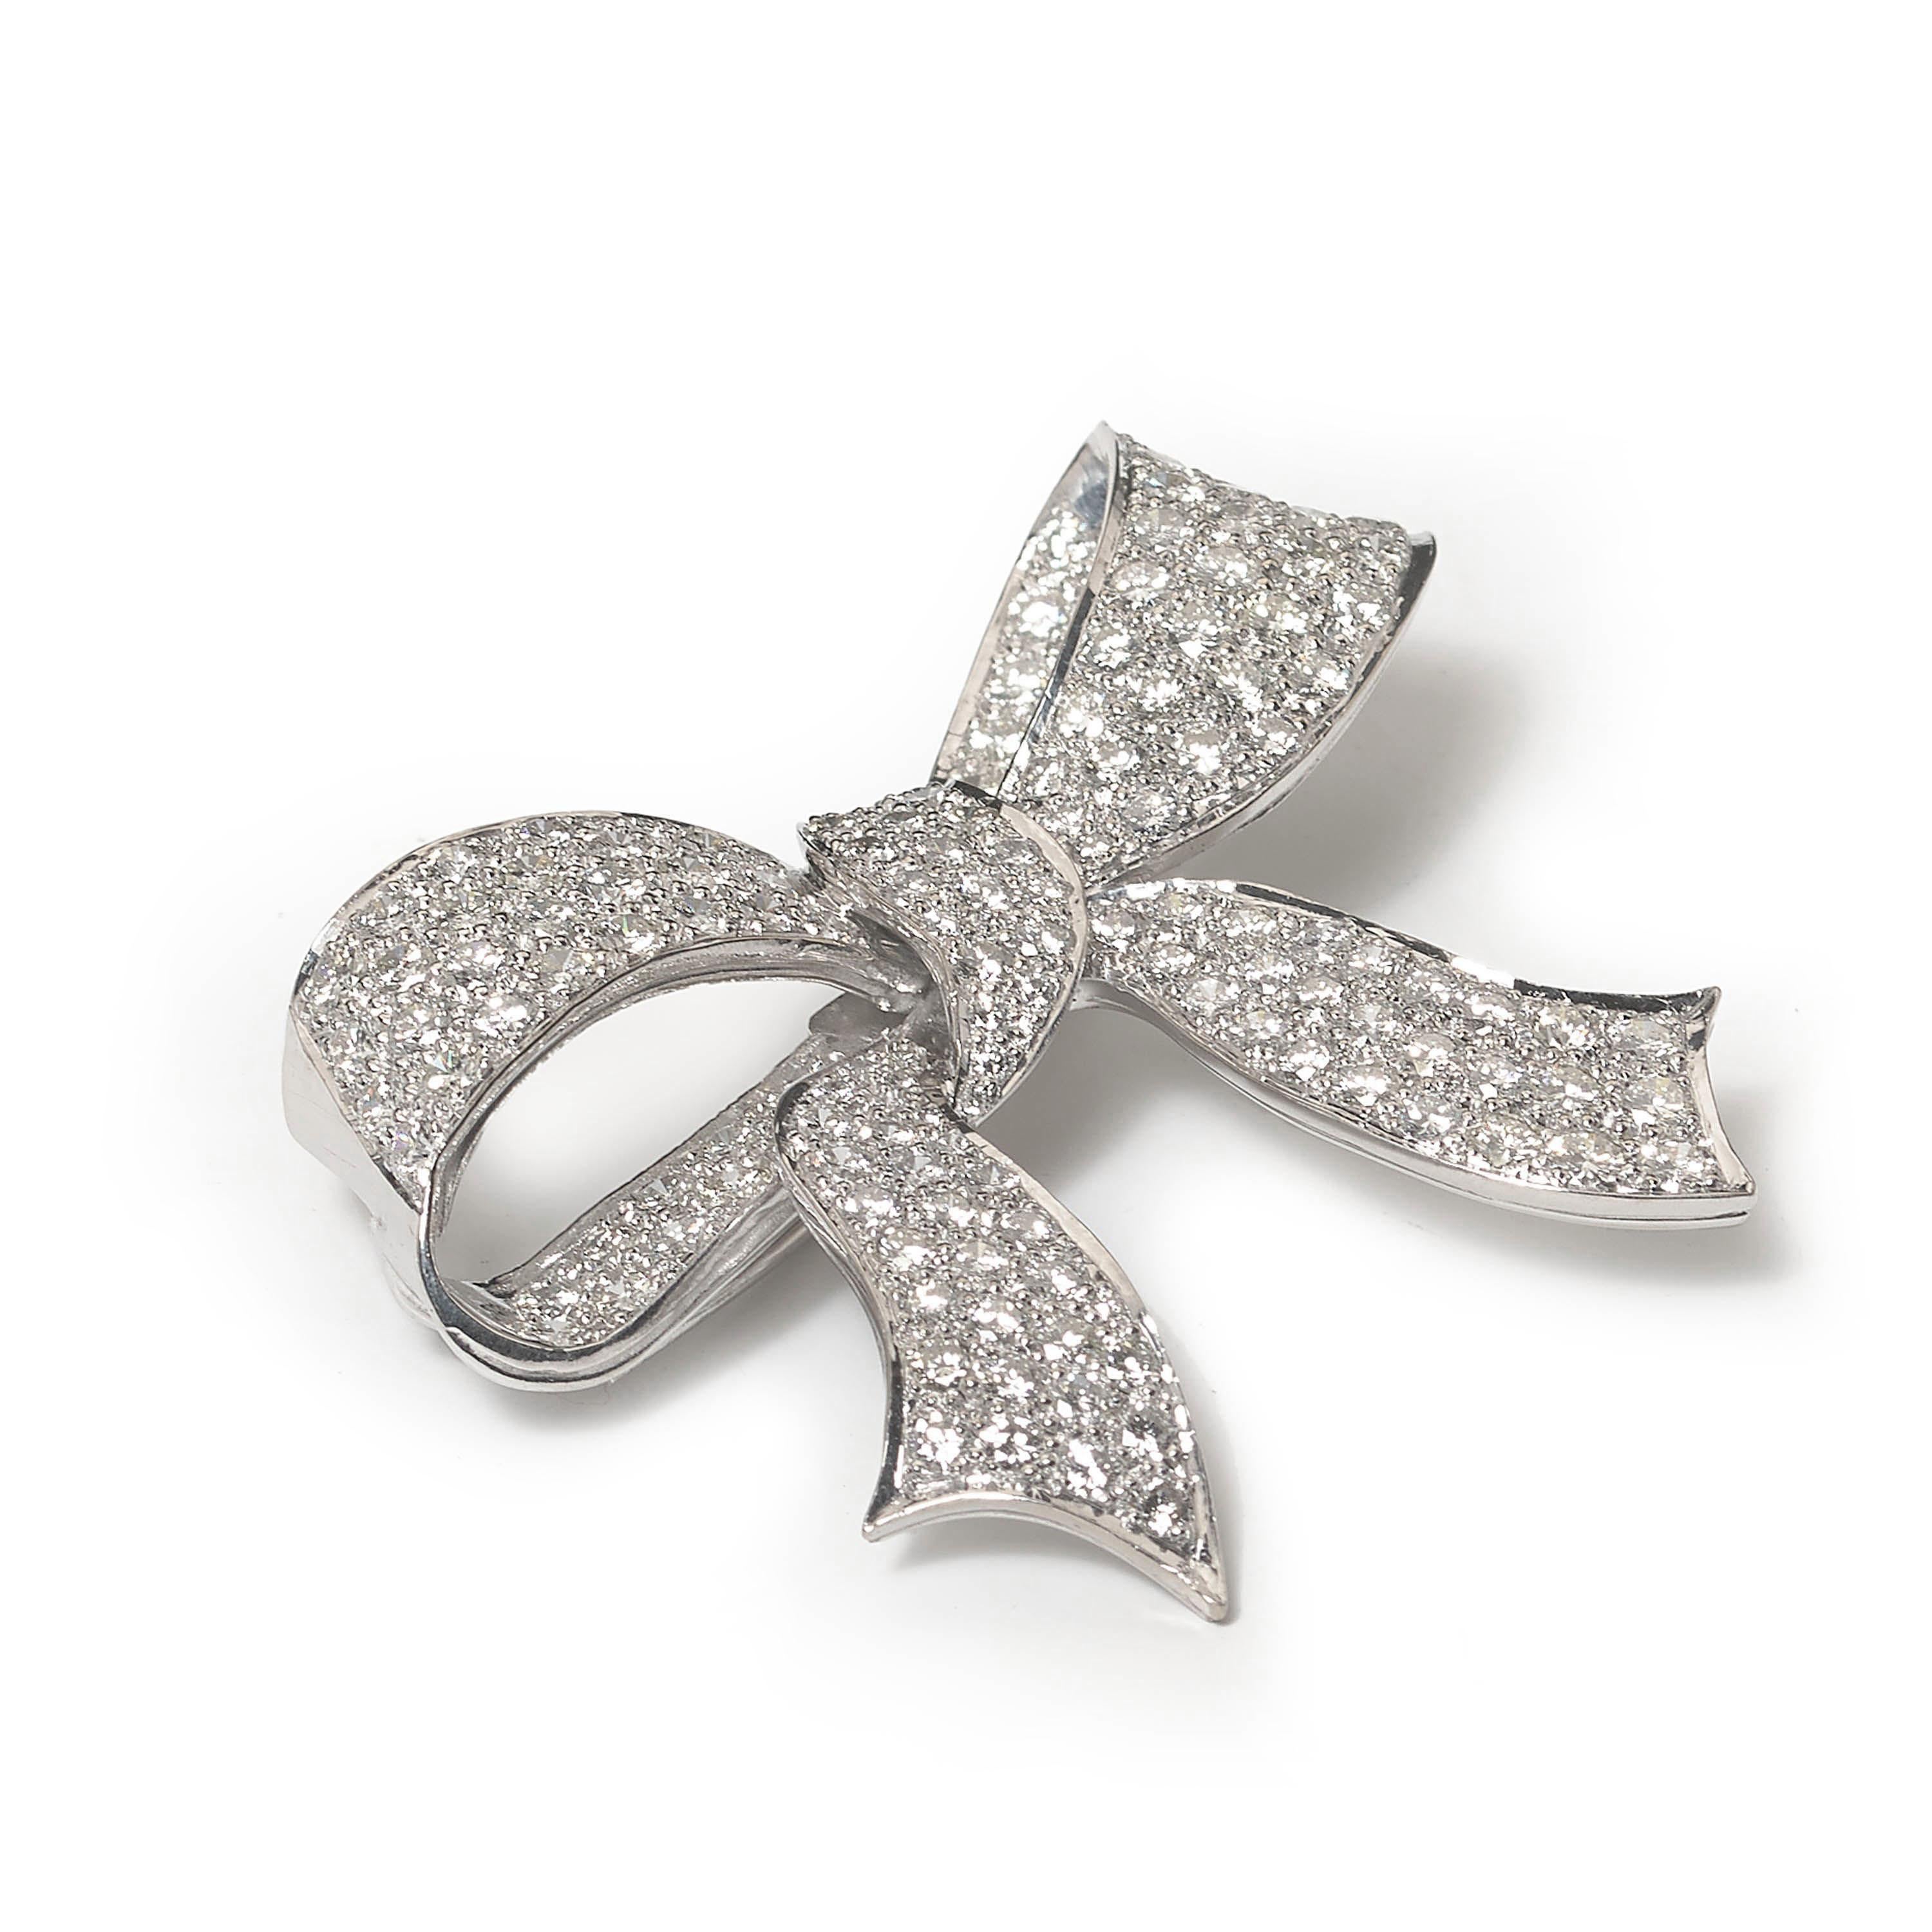 A late 20th century diamond, modern, and 18ct white gold bow brooch, with approximately 15.00 carats of round brilliant cut diamonds, in our opinion the colour is G to H and our opinion of the clarity is VS, in pavé settings, hallmarked for 18ct